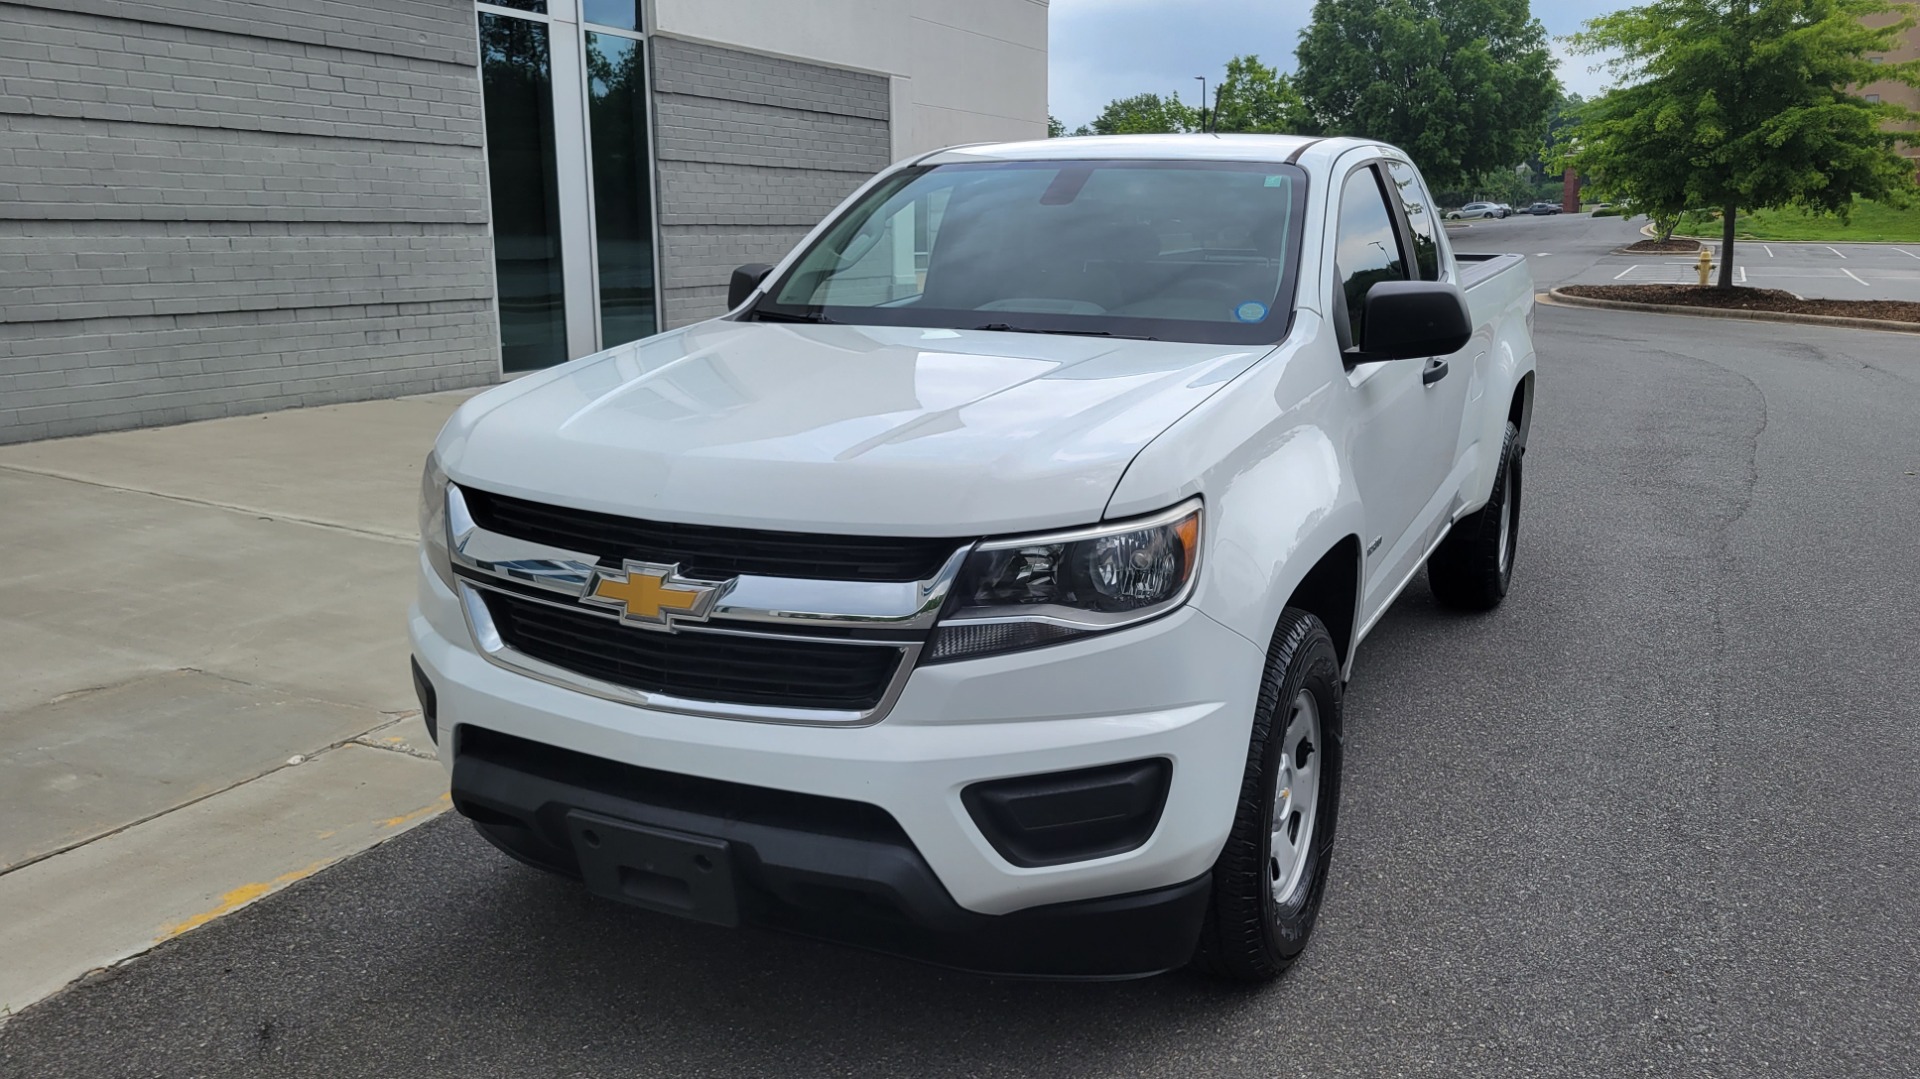 Used 2018 Chevrolet COLORADO EXT CAB / 2.5L / 2WD / 6-SPD AUTO / WORK TRUCK / REARVIEW for sale Sold at Formula Imports in Charlotte NC 28227 3